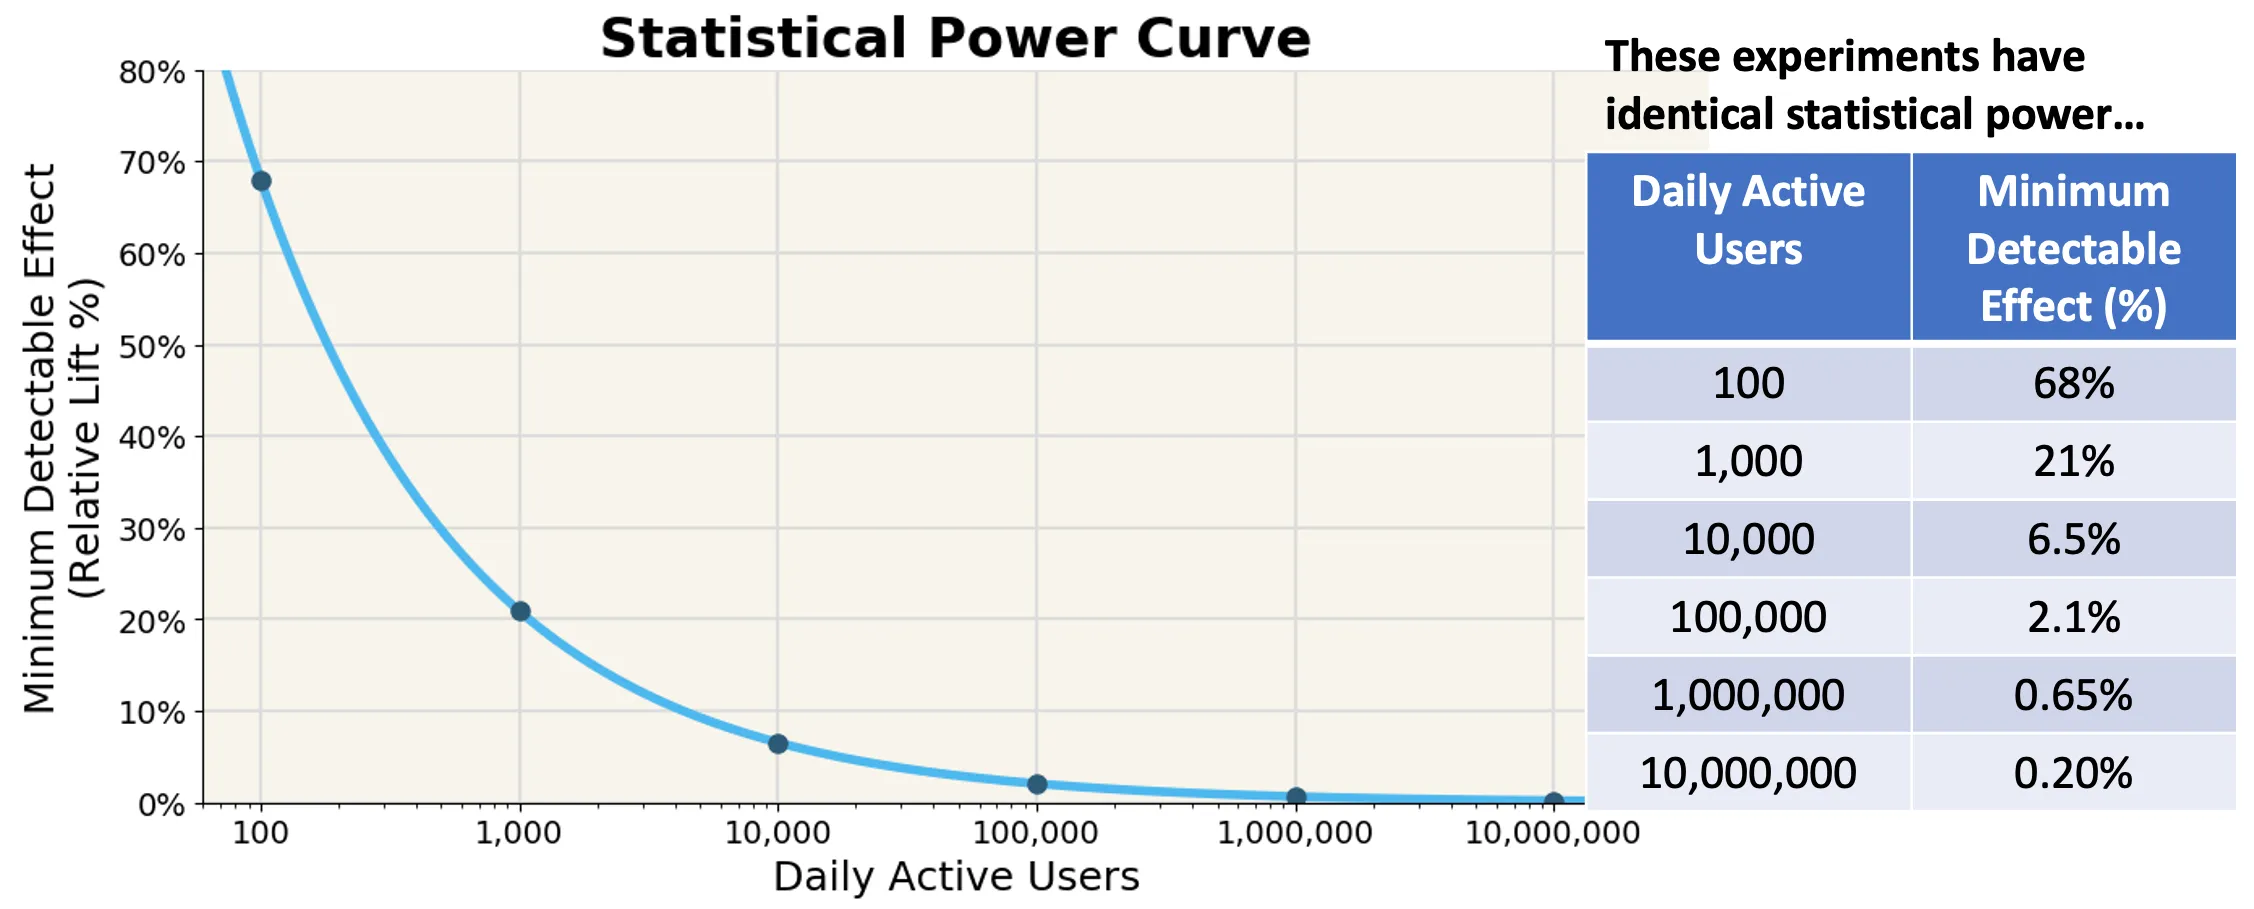 Statistical Power Curve